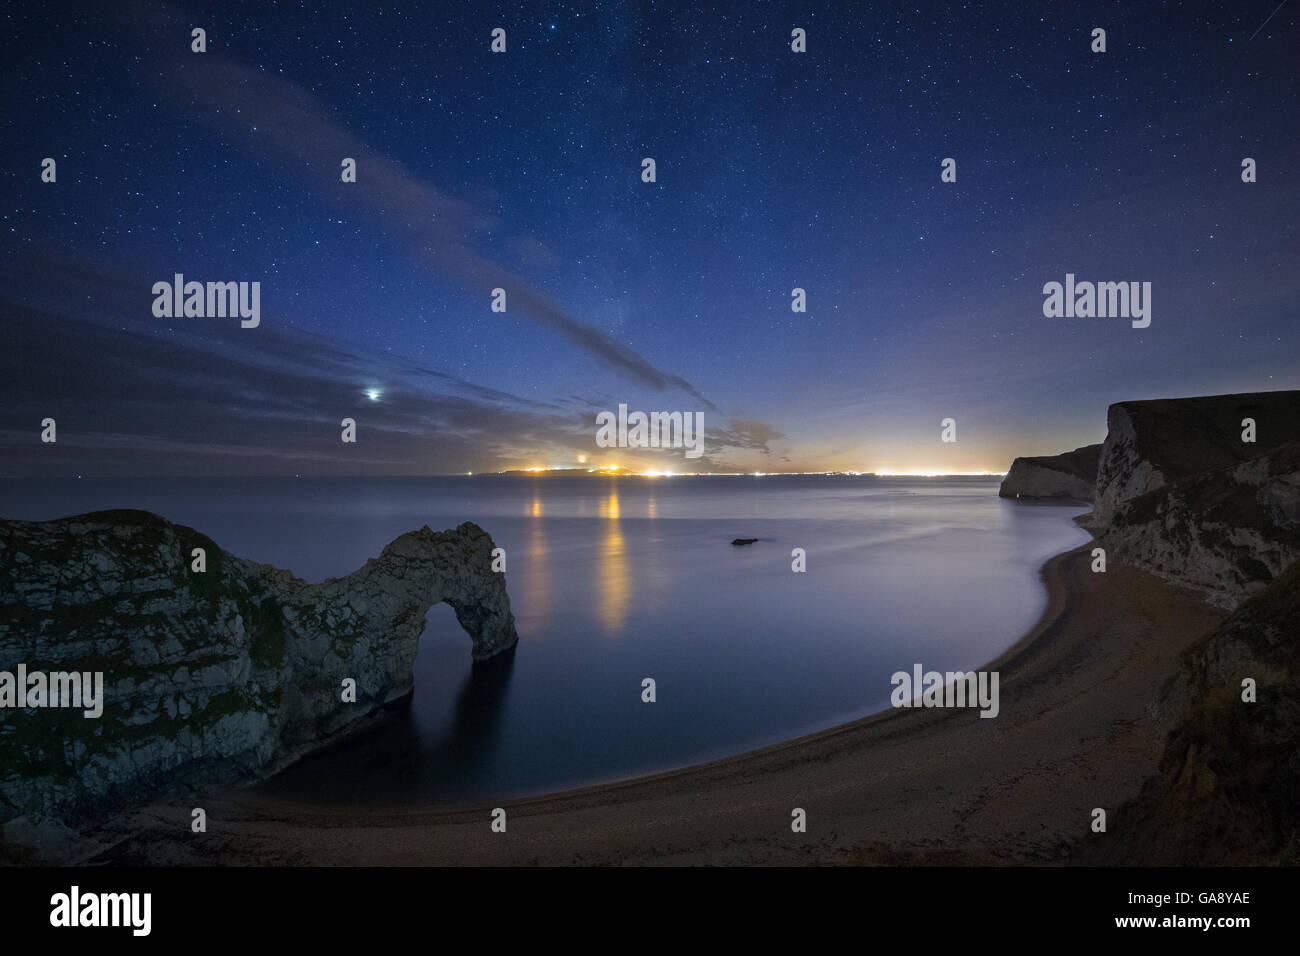 Stars and Milky Way over Durdle Door and the Jurassic Coast, with the lights of Weymouth and Portland beyond, Dorset, England, UK, December 2013. Stock Photo